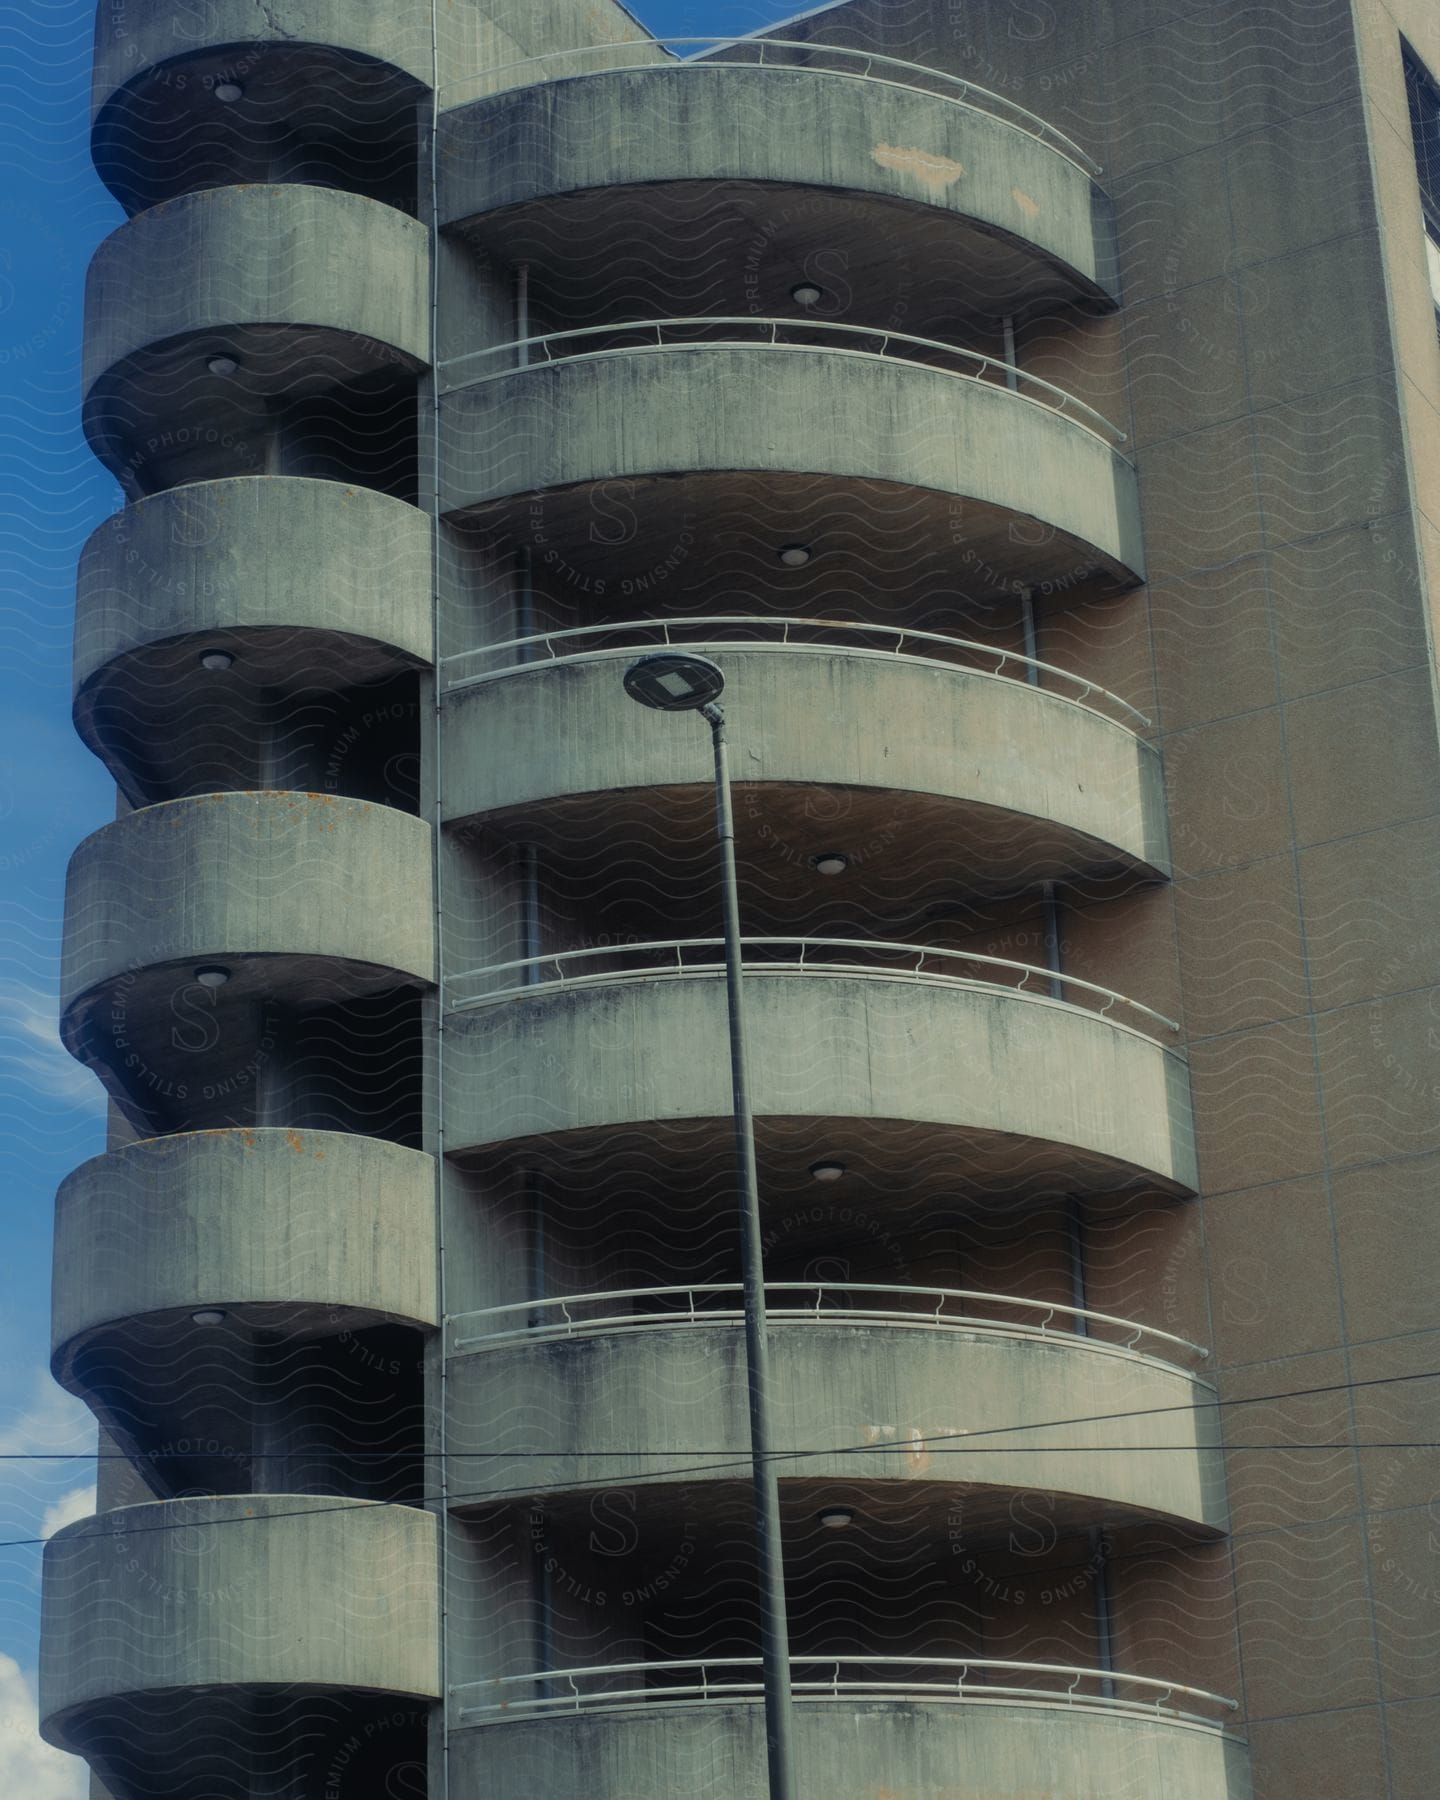 Exterior architecture of a modern building with grayish patterned balconies.